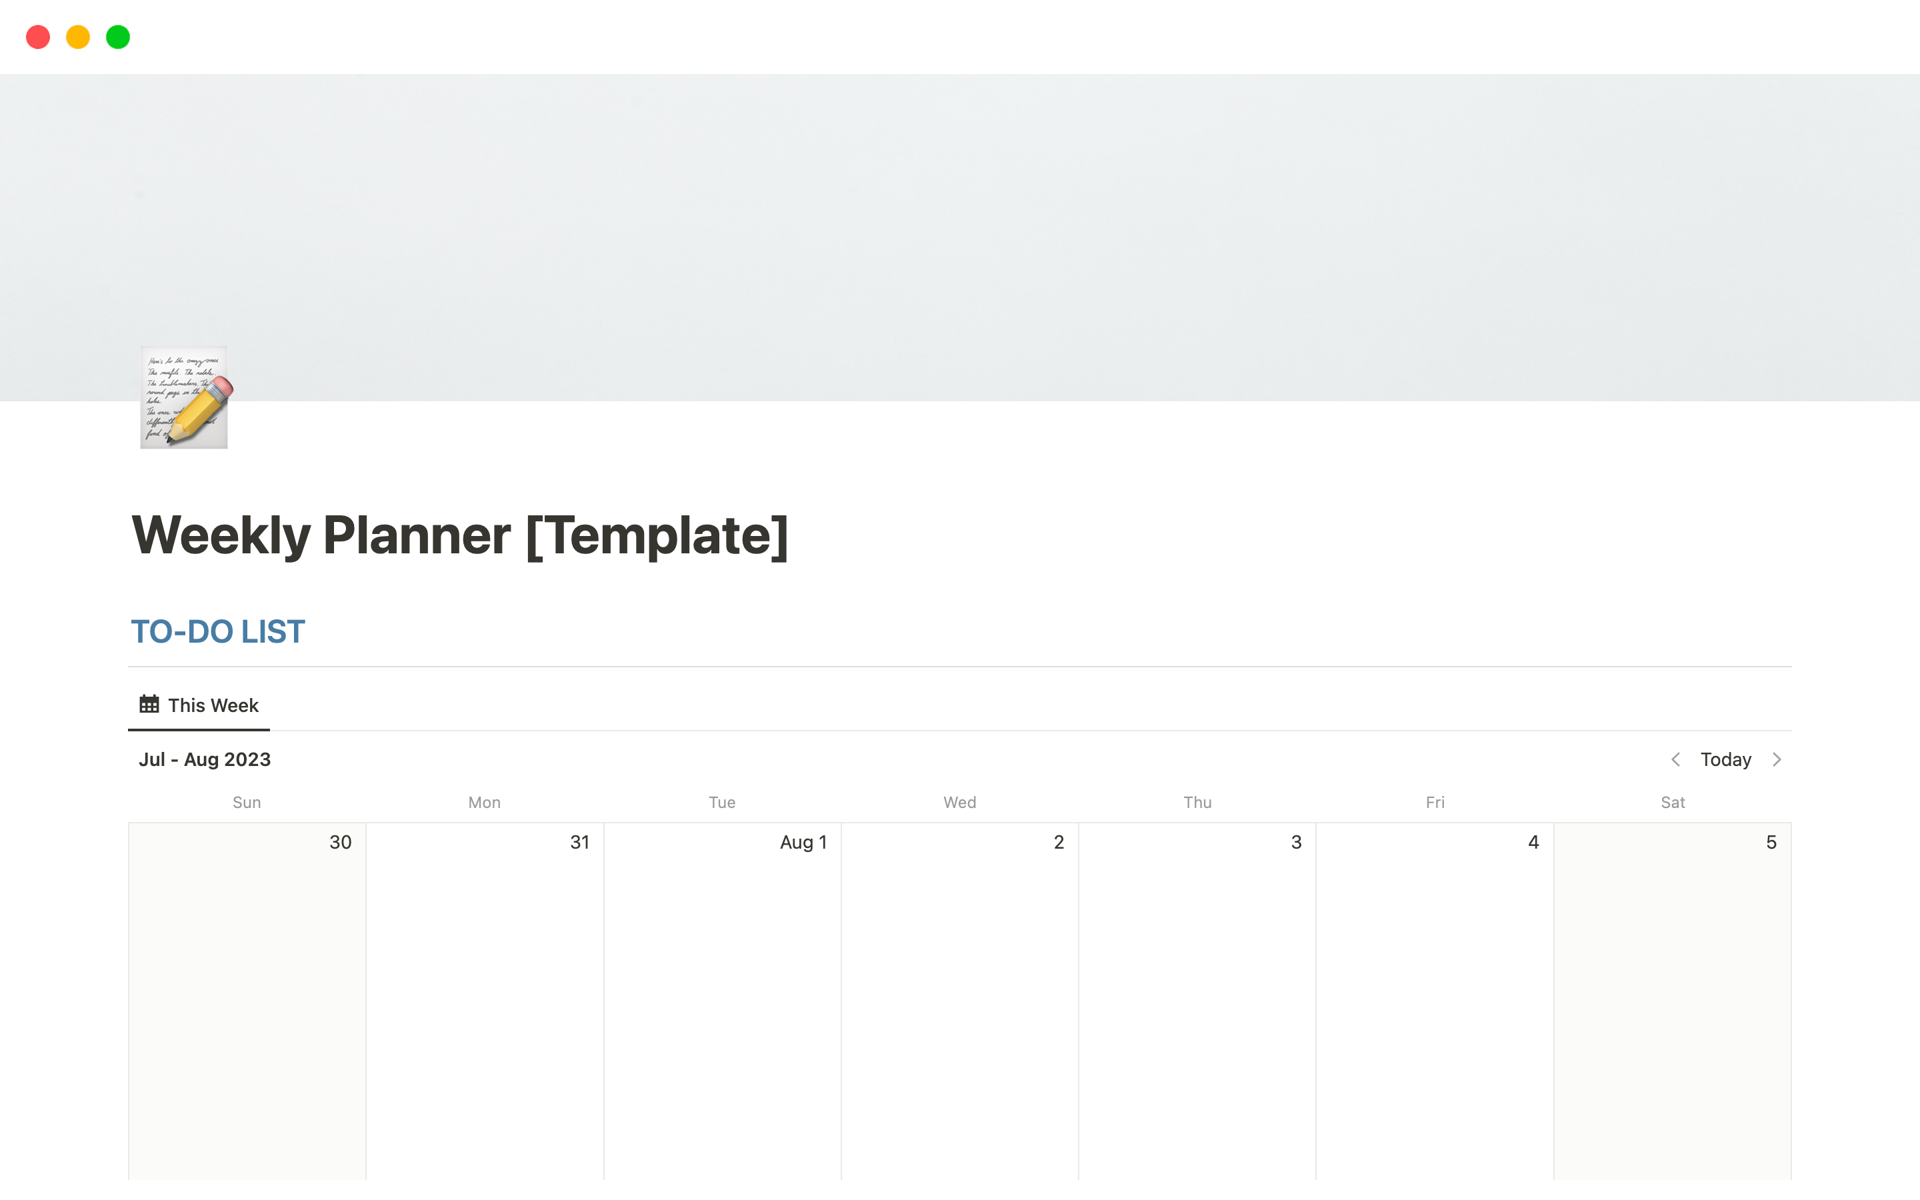 20+ Notion Bullet Journal Templates 2023: Time to Get Organized!